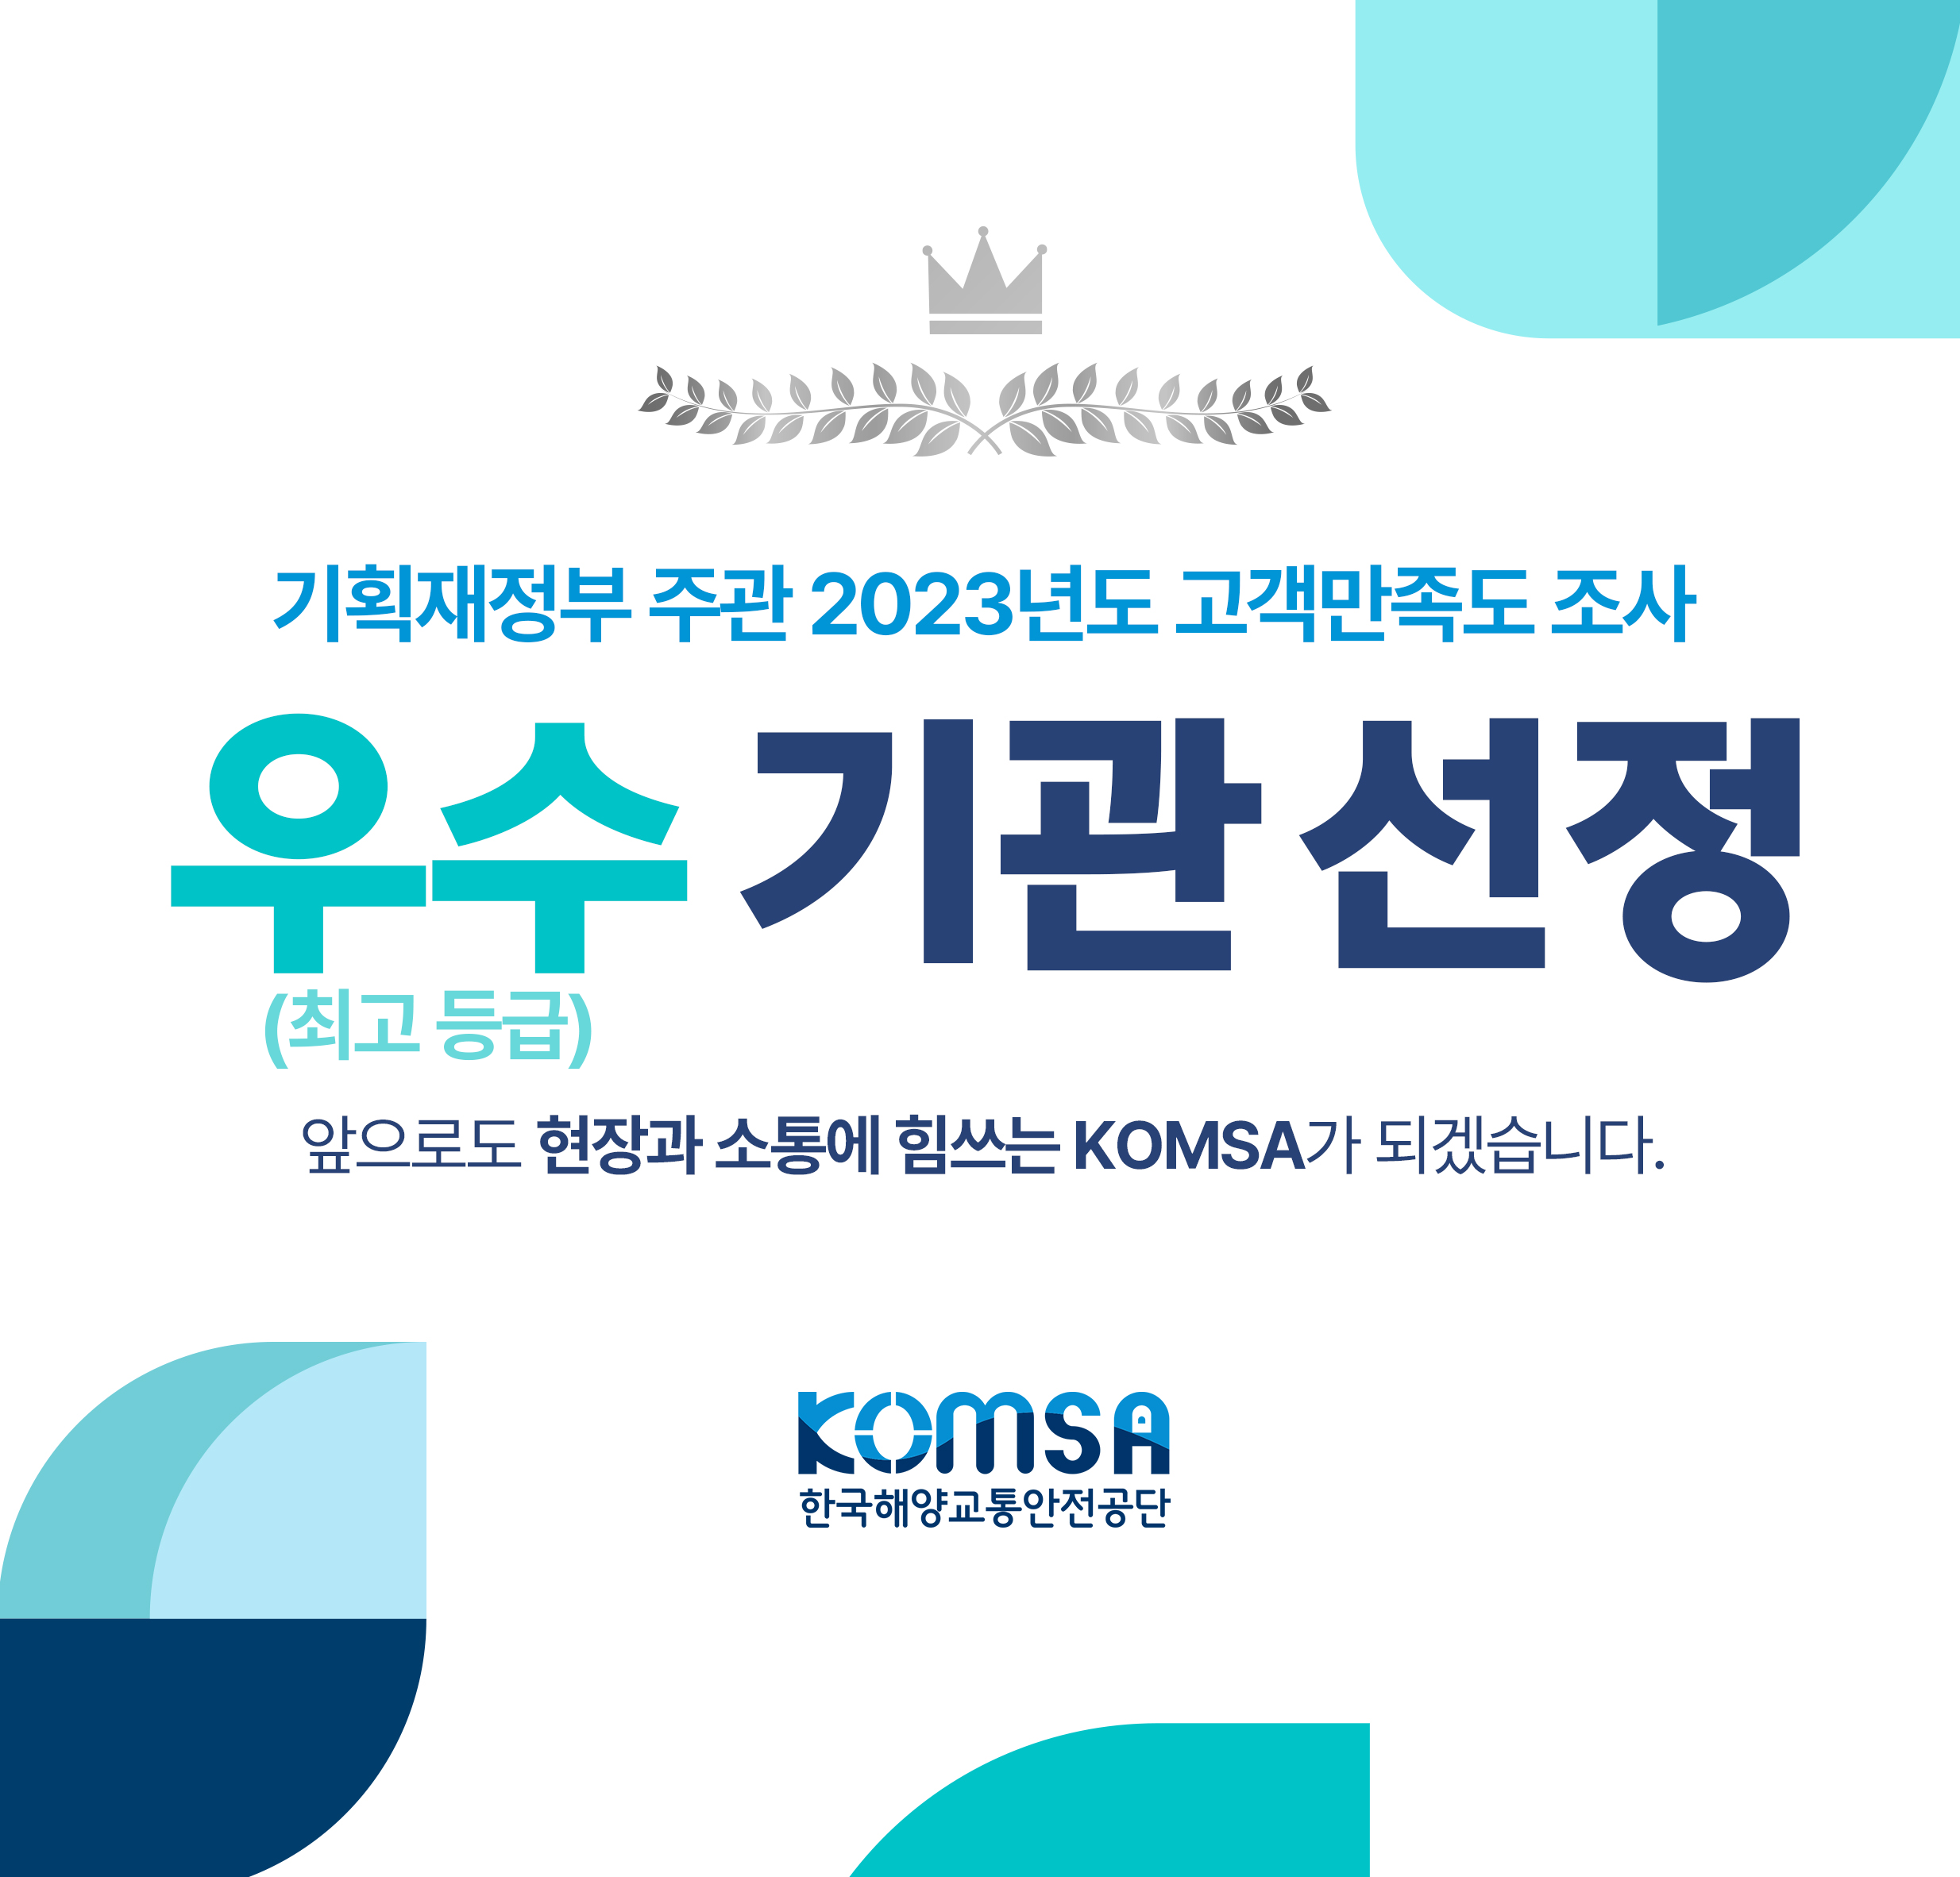 https://www.komsa.or.kr/kor/;jsessionid=A3A24F5A92ACE27AE47D4A11FCE0EAC7